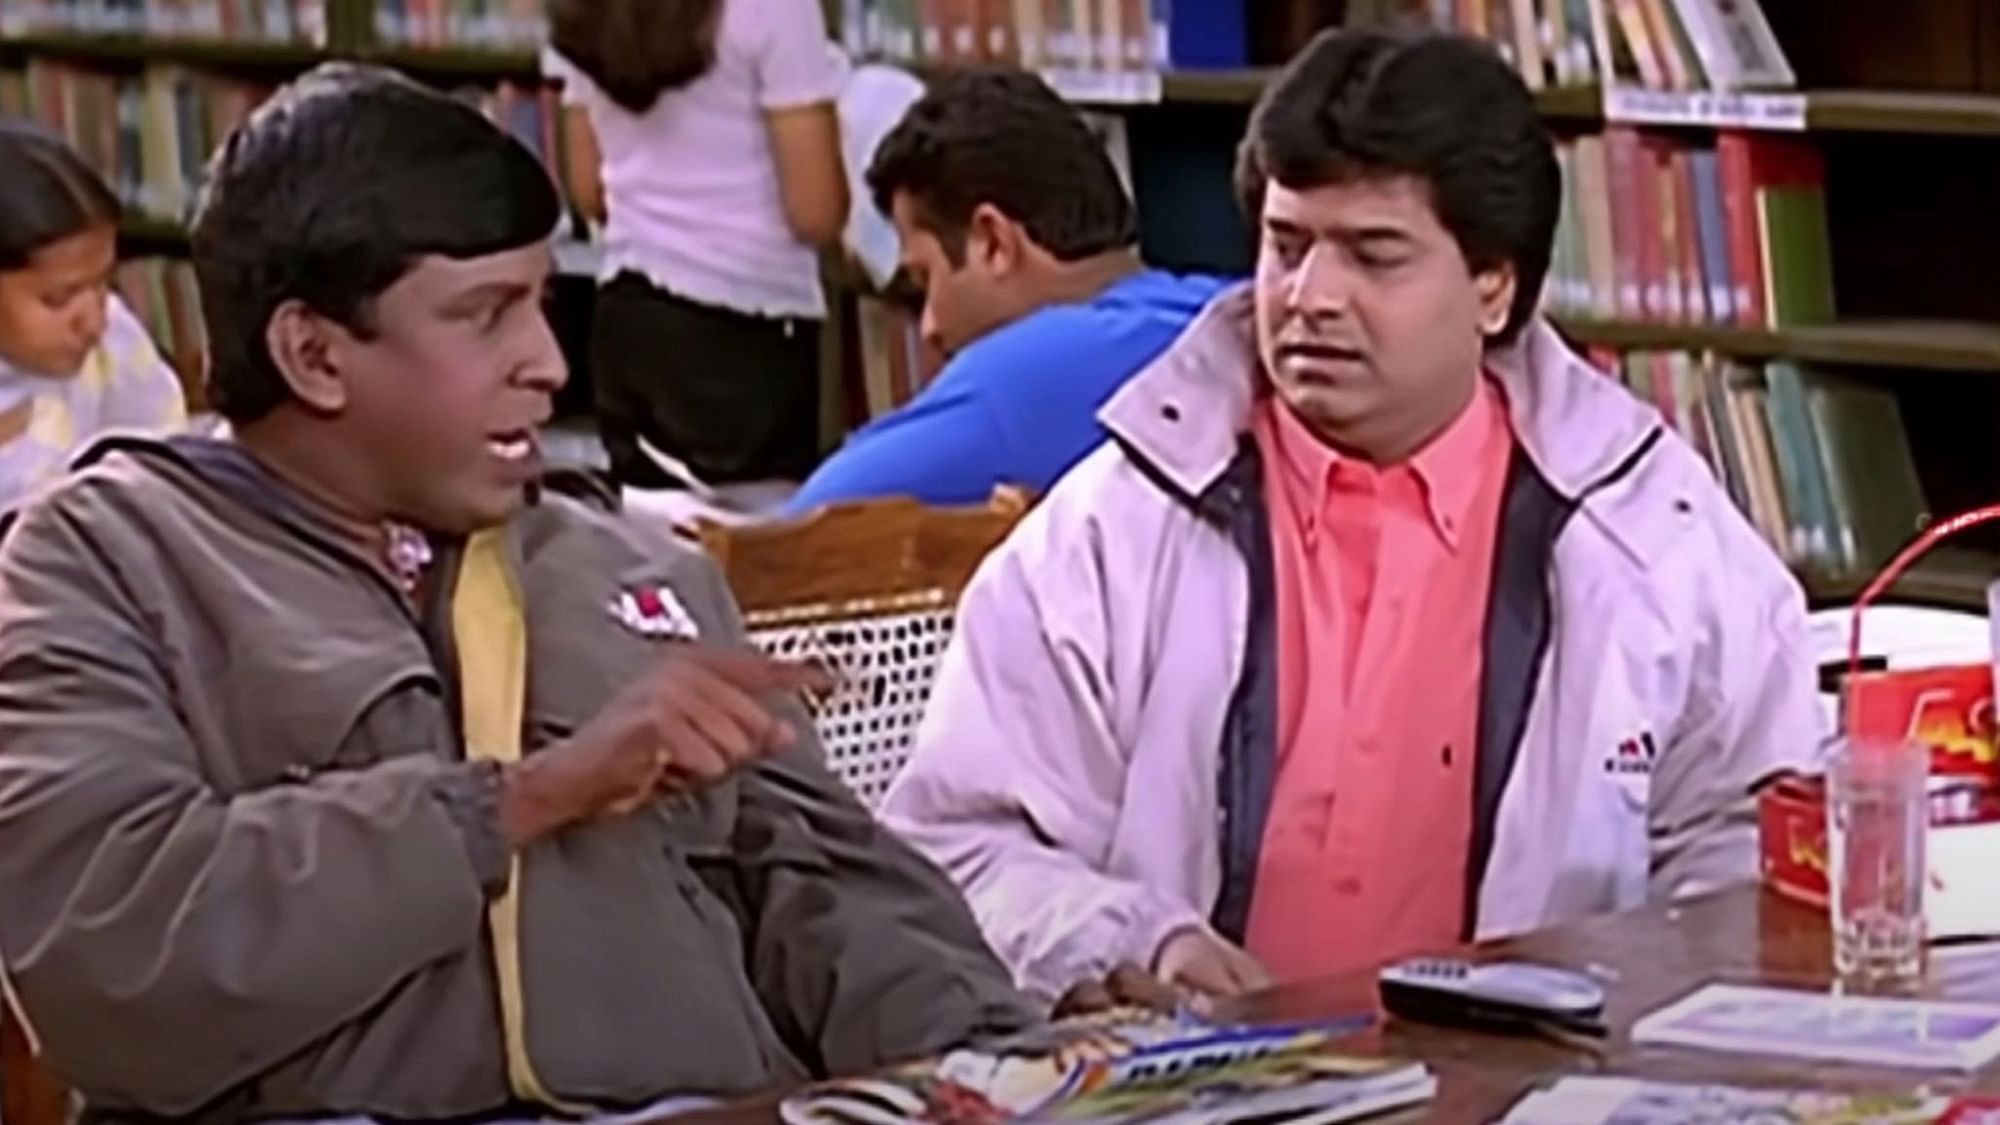 Vivek and Vadivelu’s comic chemistry and timing in the movie, <i>Manadhai Thirudivittai </i>(2001) was an absolute laugh riot.